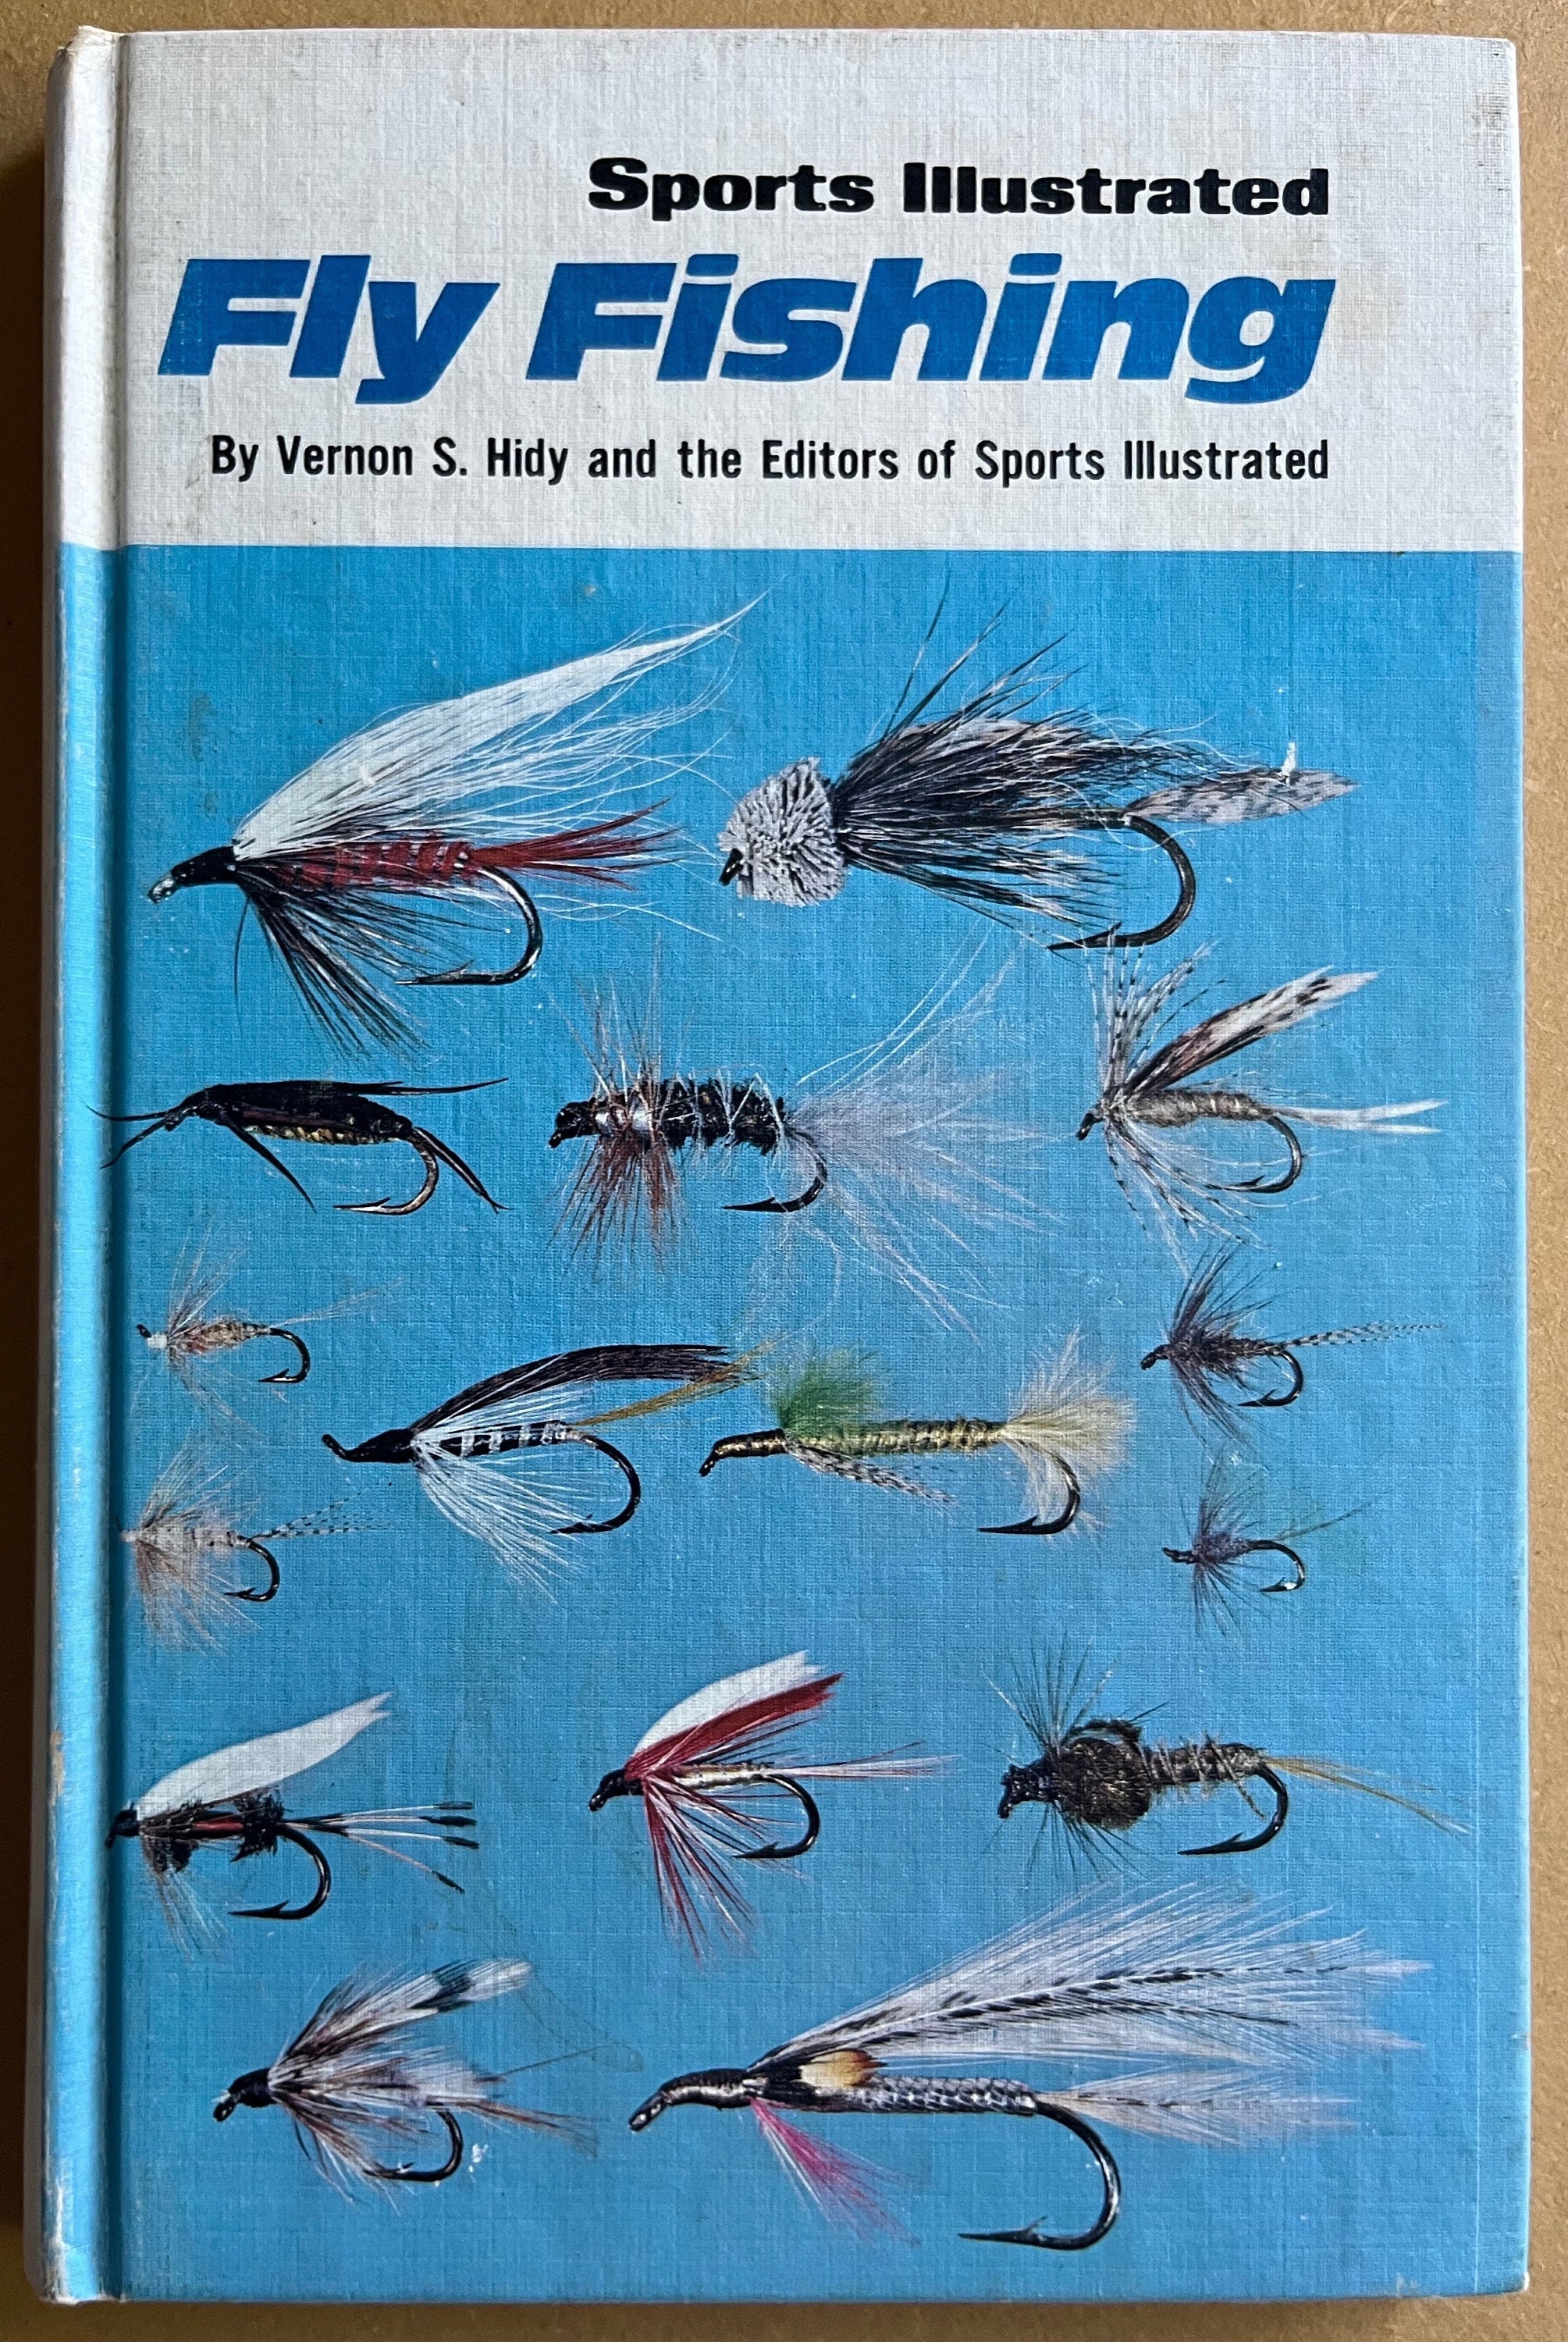 Vintage P. & S. Fly Fish Hooks. part 3 - その他